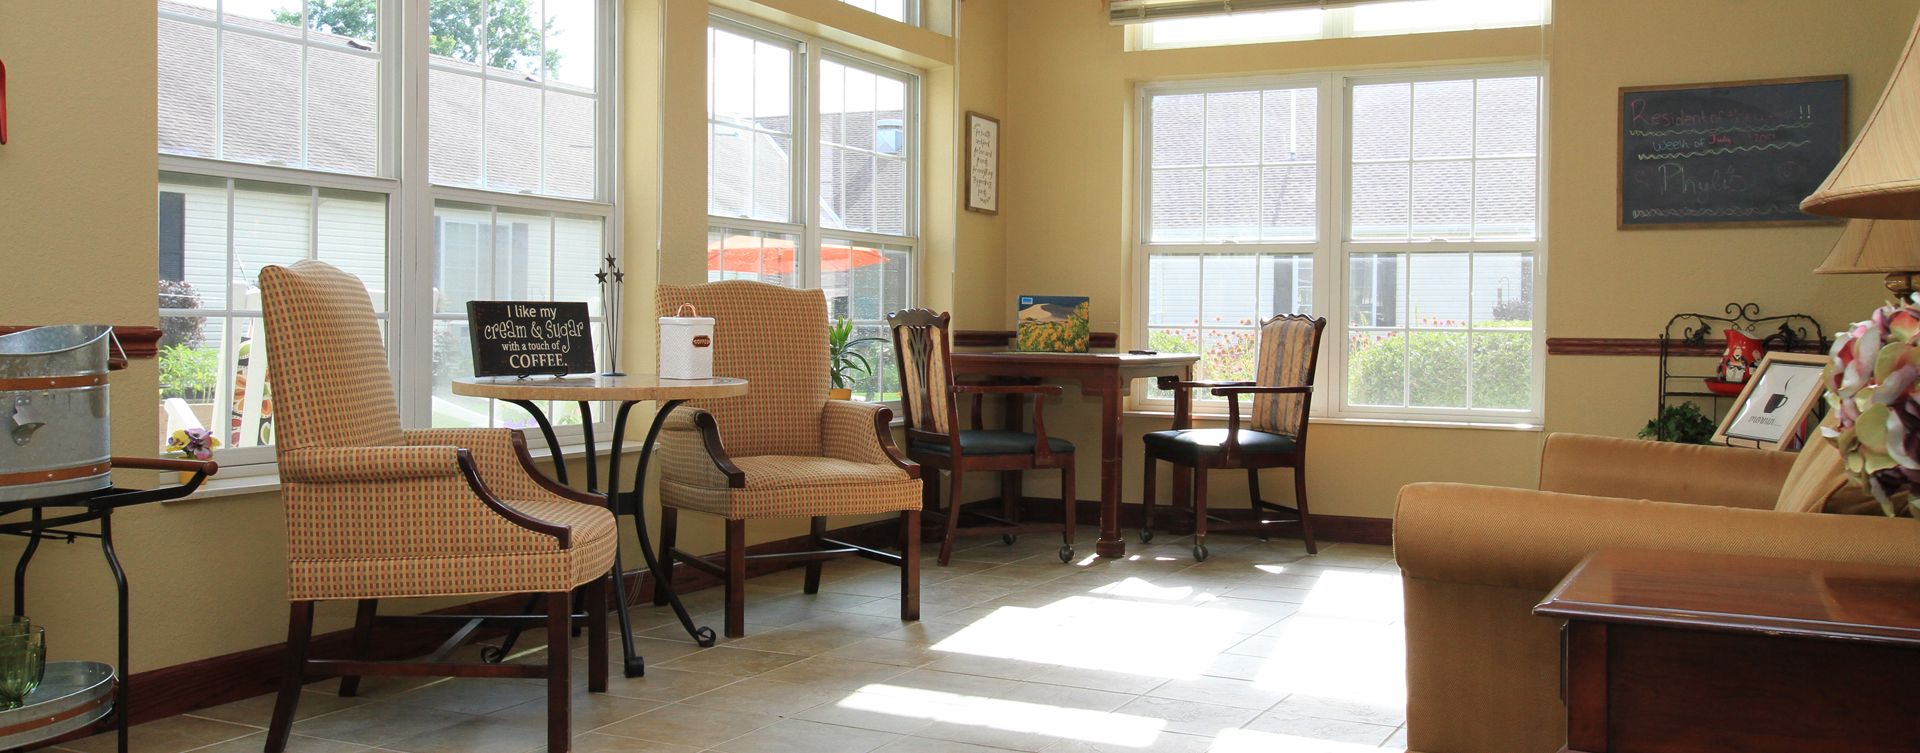 Relax in the warmth of the sunroom at Bickford of Saginaw Township